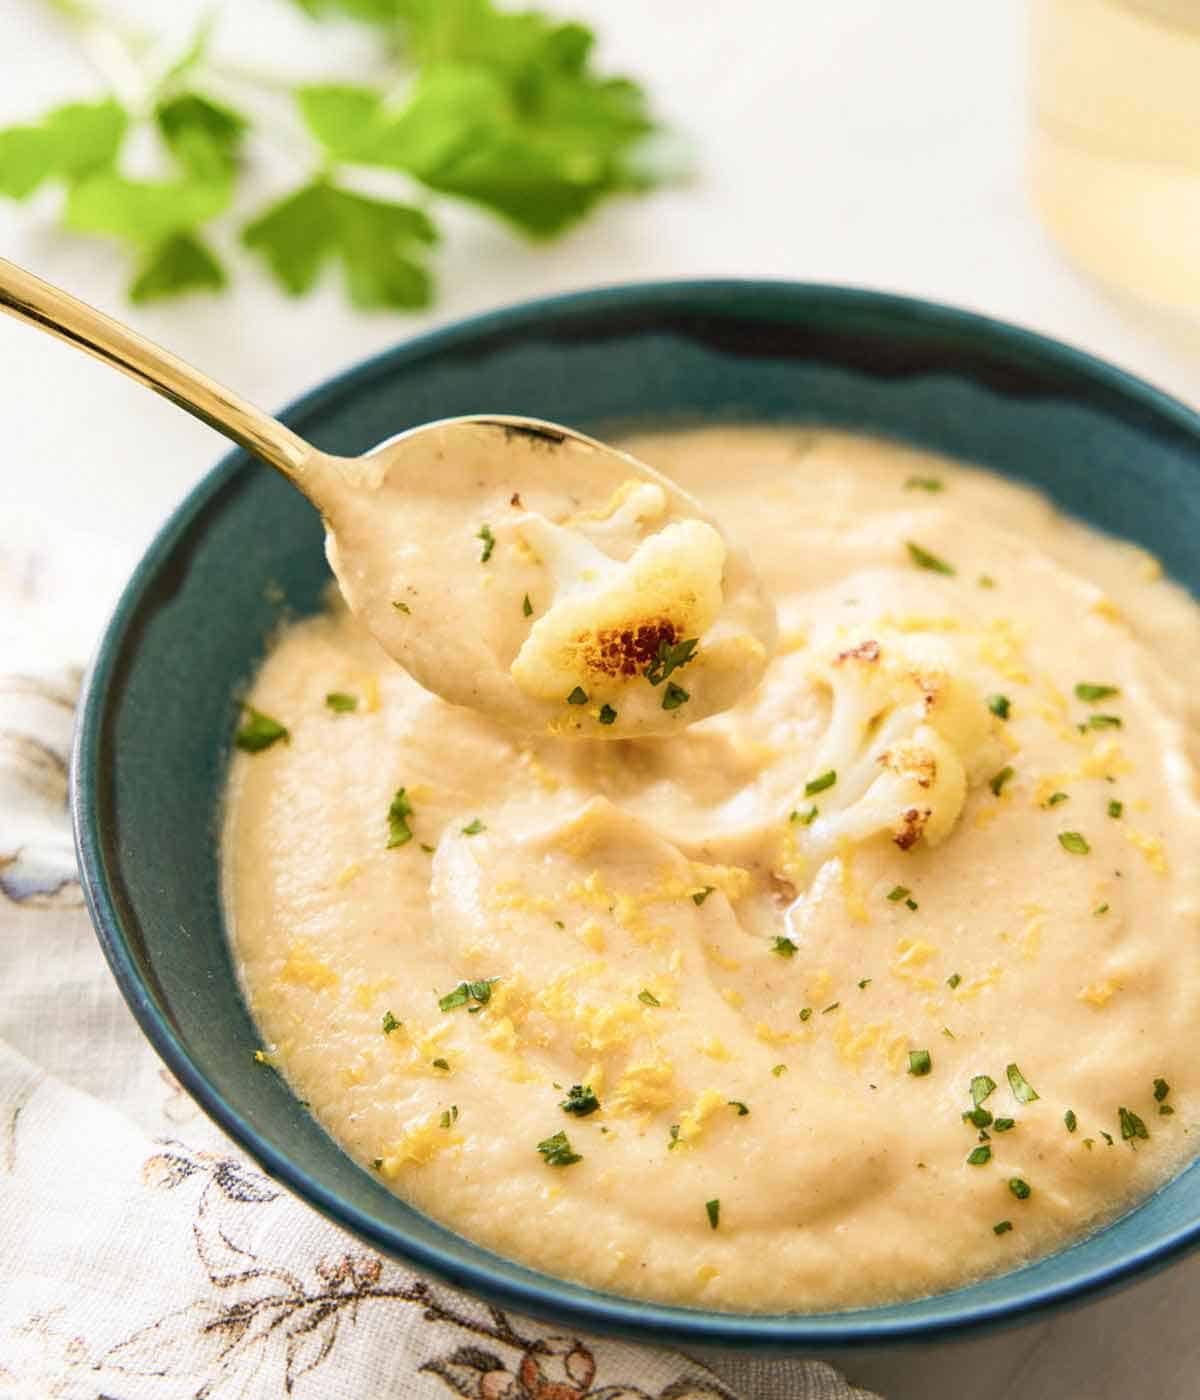 A bowl of cauliflower soup garnished with parsley and lemon zest with a spoonful lifted out.